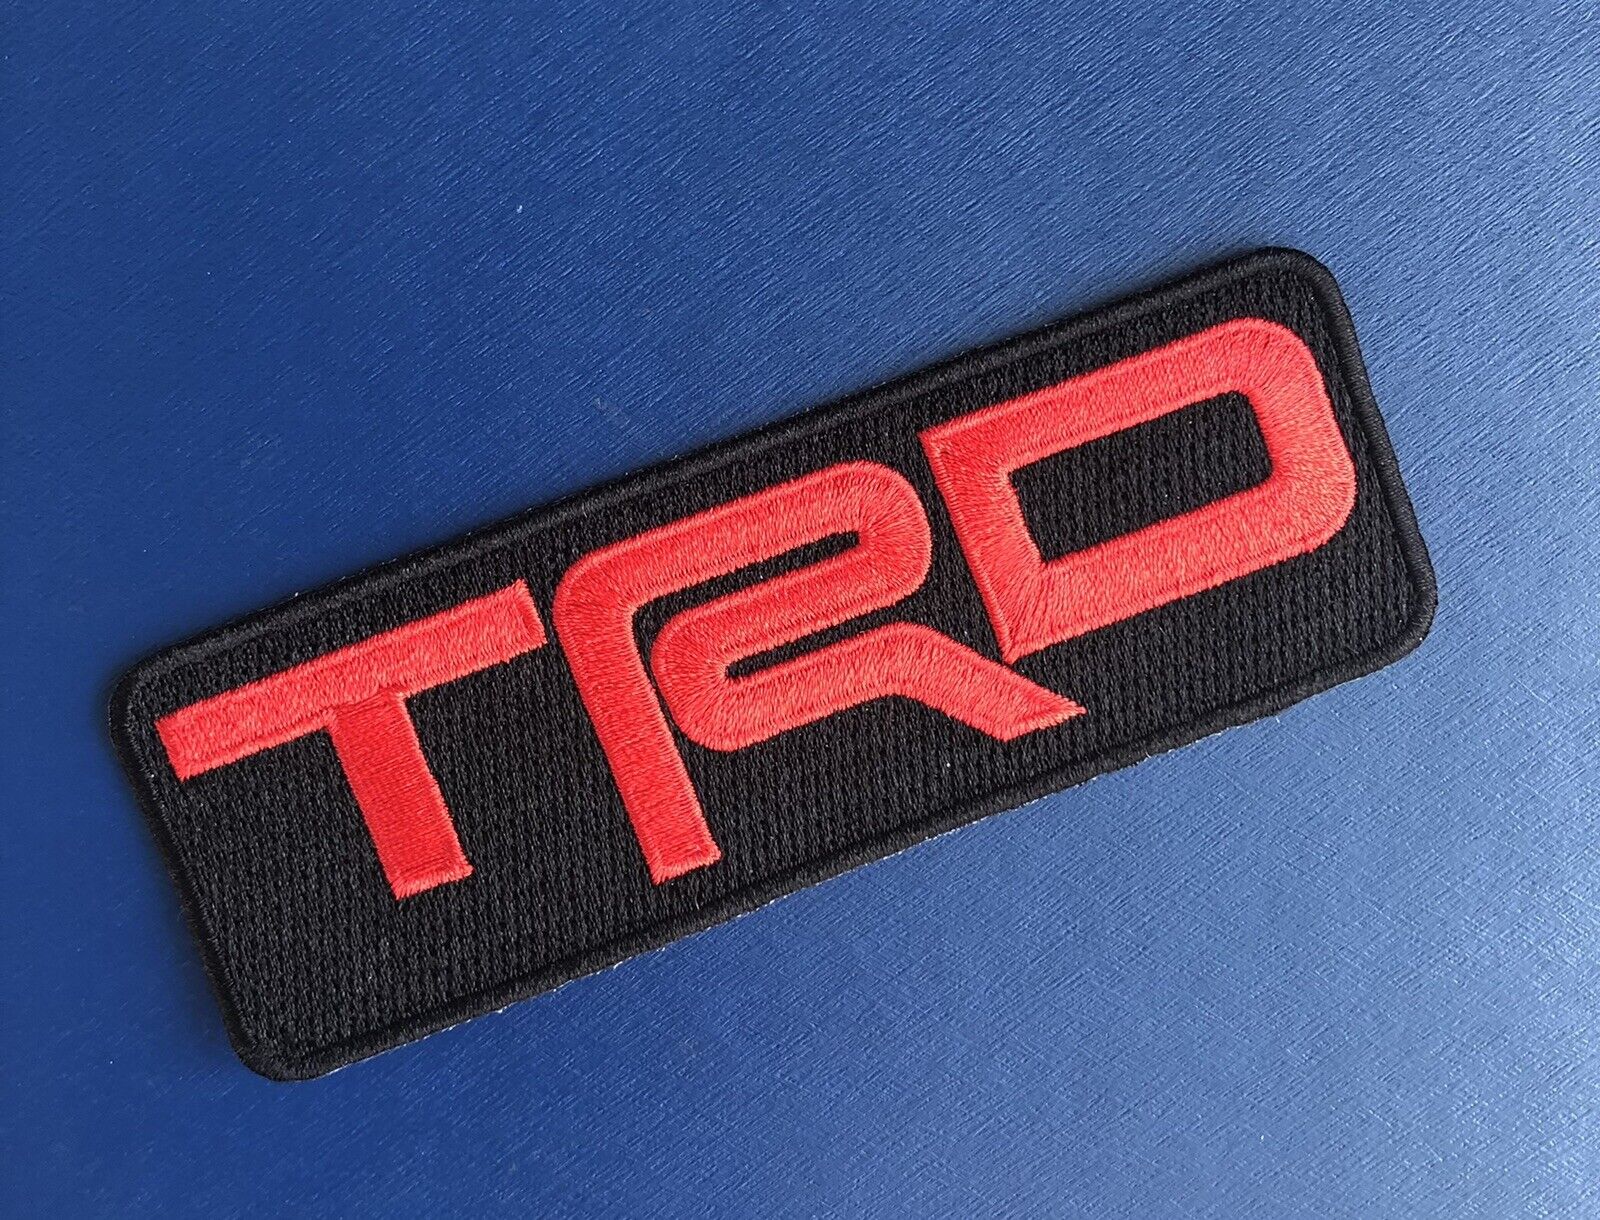 TRD Toyota Racing Development Iron On Patch. 5”x1.75” Solid Red